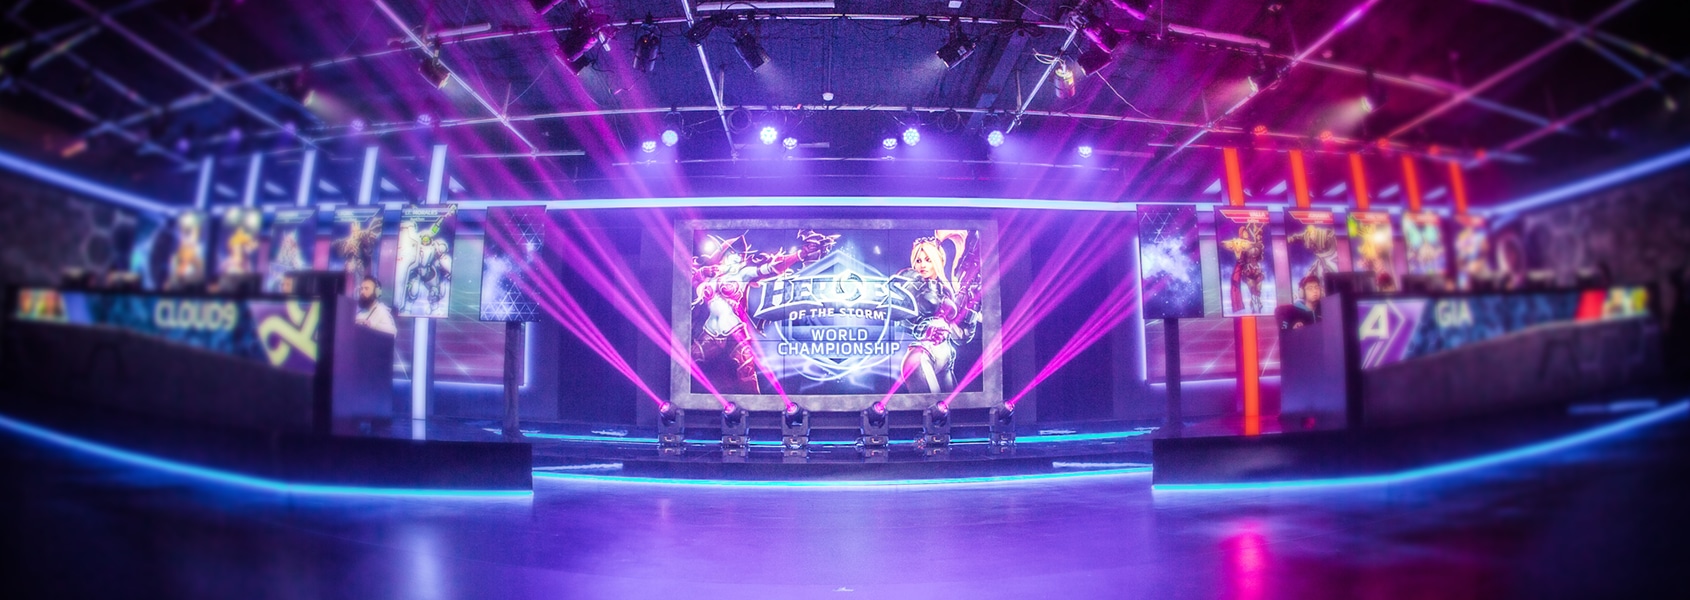 Heroes of the Storm Spring Global Championship 2016